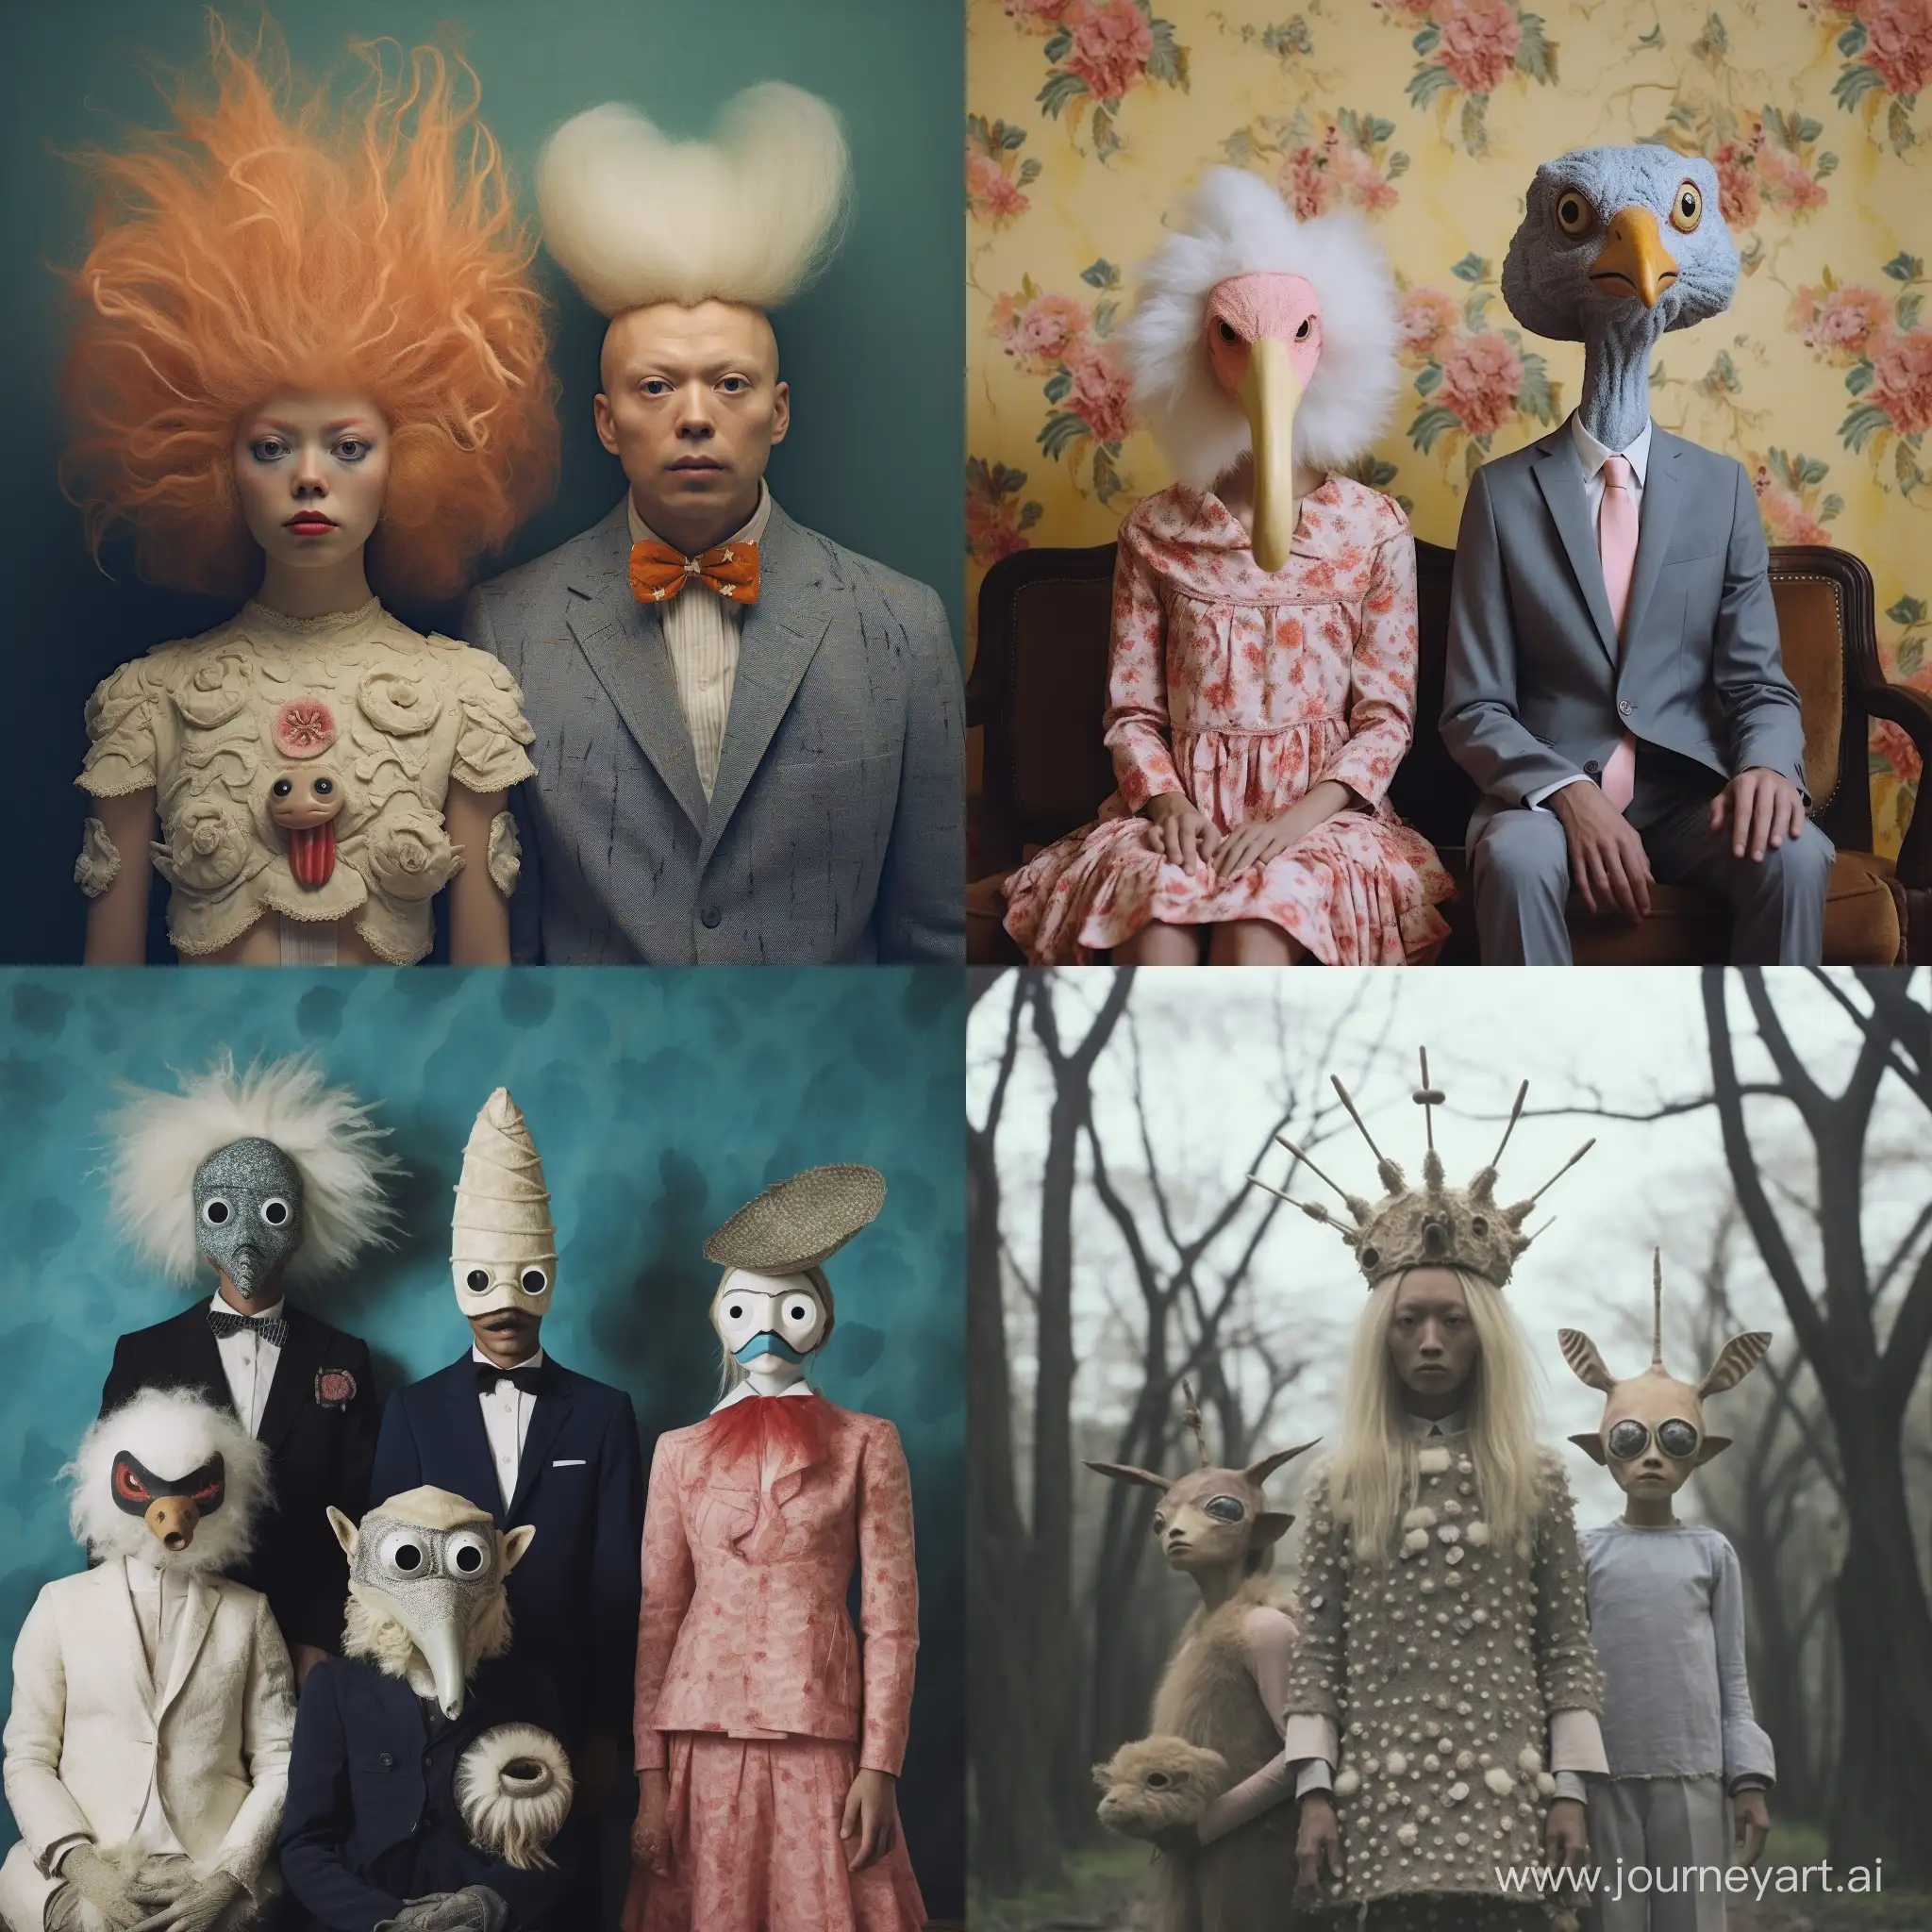 Eclectic-Group-Portrait-of-Unconventional-Individuals-in-Square-Frame